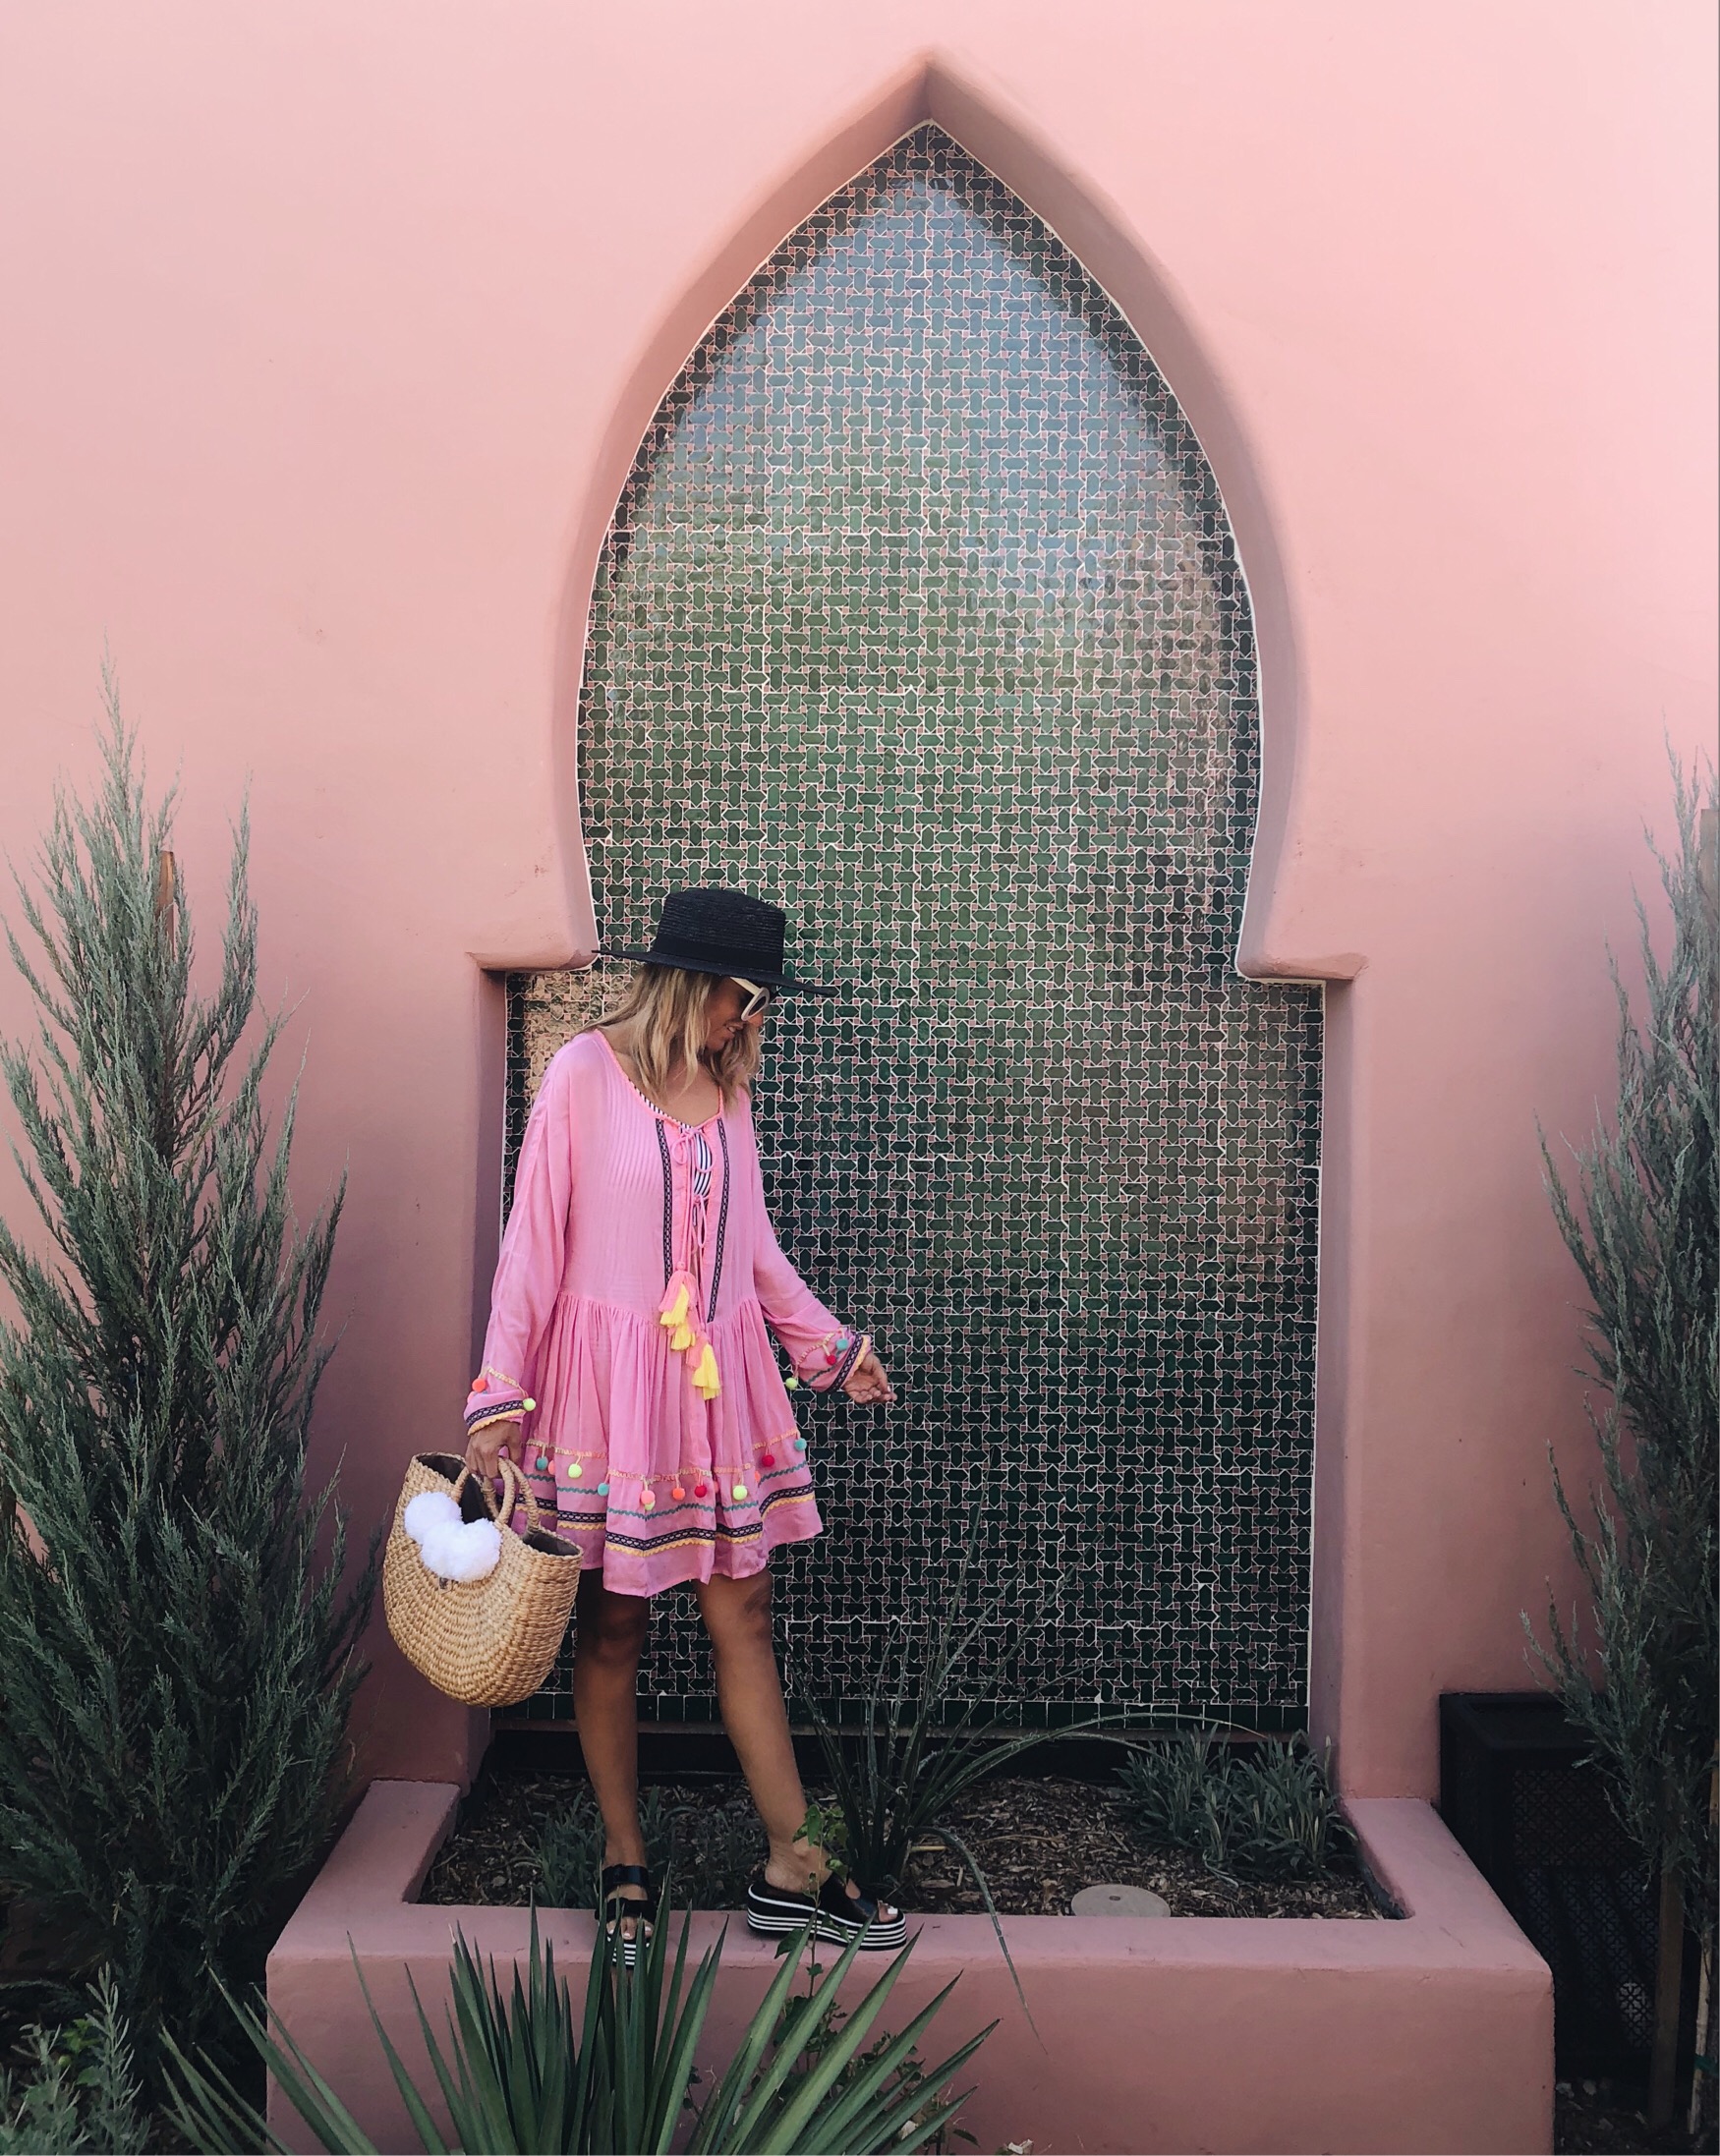 ANNIVERSARY WEEKEND GETAWAY AT THE SANDS HOTEL- Jaclyn De Leon Style + PALM SPRINGS HOTEL + BOHEMIAN + MOROCCAN + PINK POM POM SWIMSUIT COVER UP + STRAW BEACH TOTE + BLACK WIDE BRIM HAT + PLATFORM SANDALS + ASOS OUTFIT + SUMMER STYLE + VACATION + TRAVEL